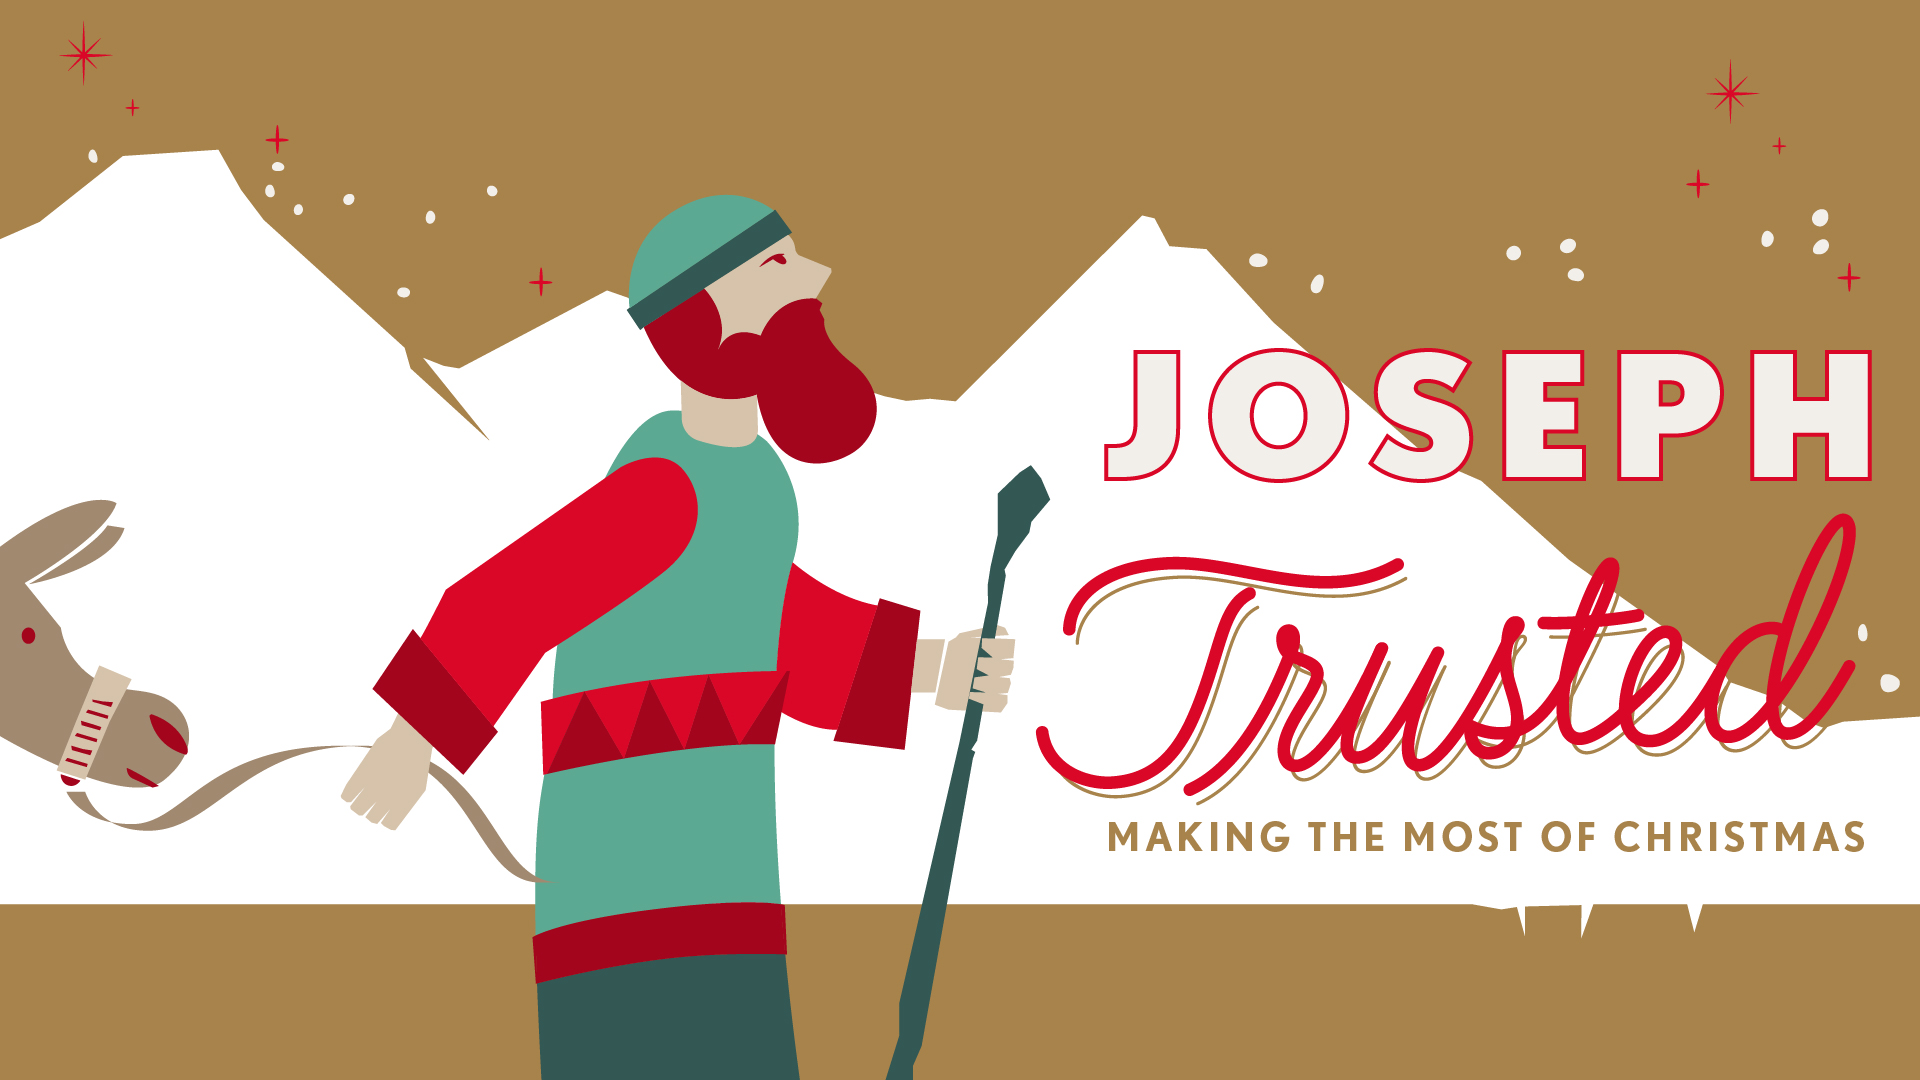 Making the Most of Christmas: Joseph